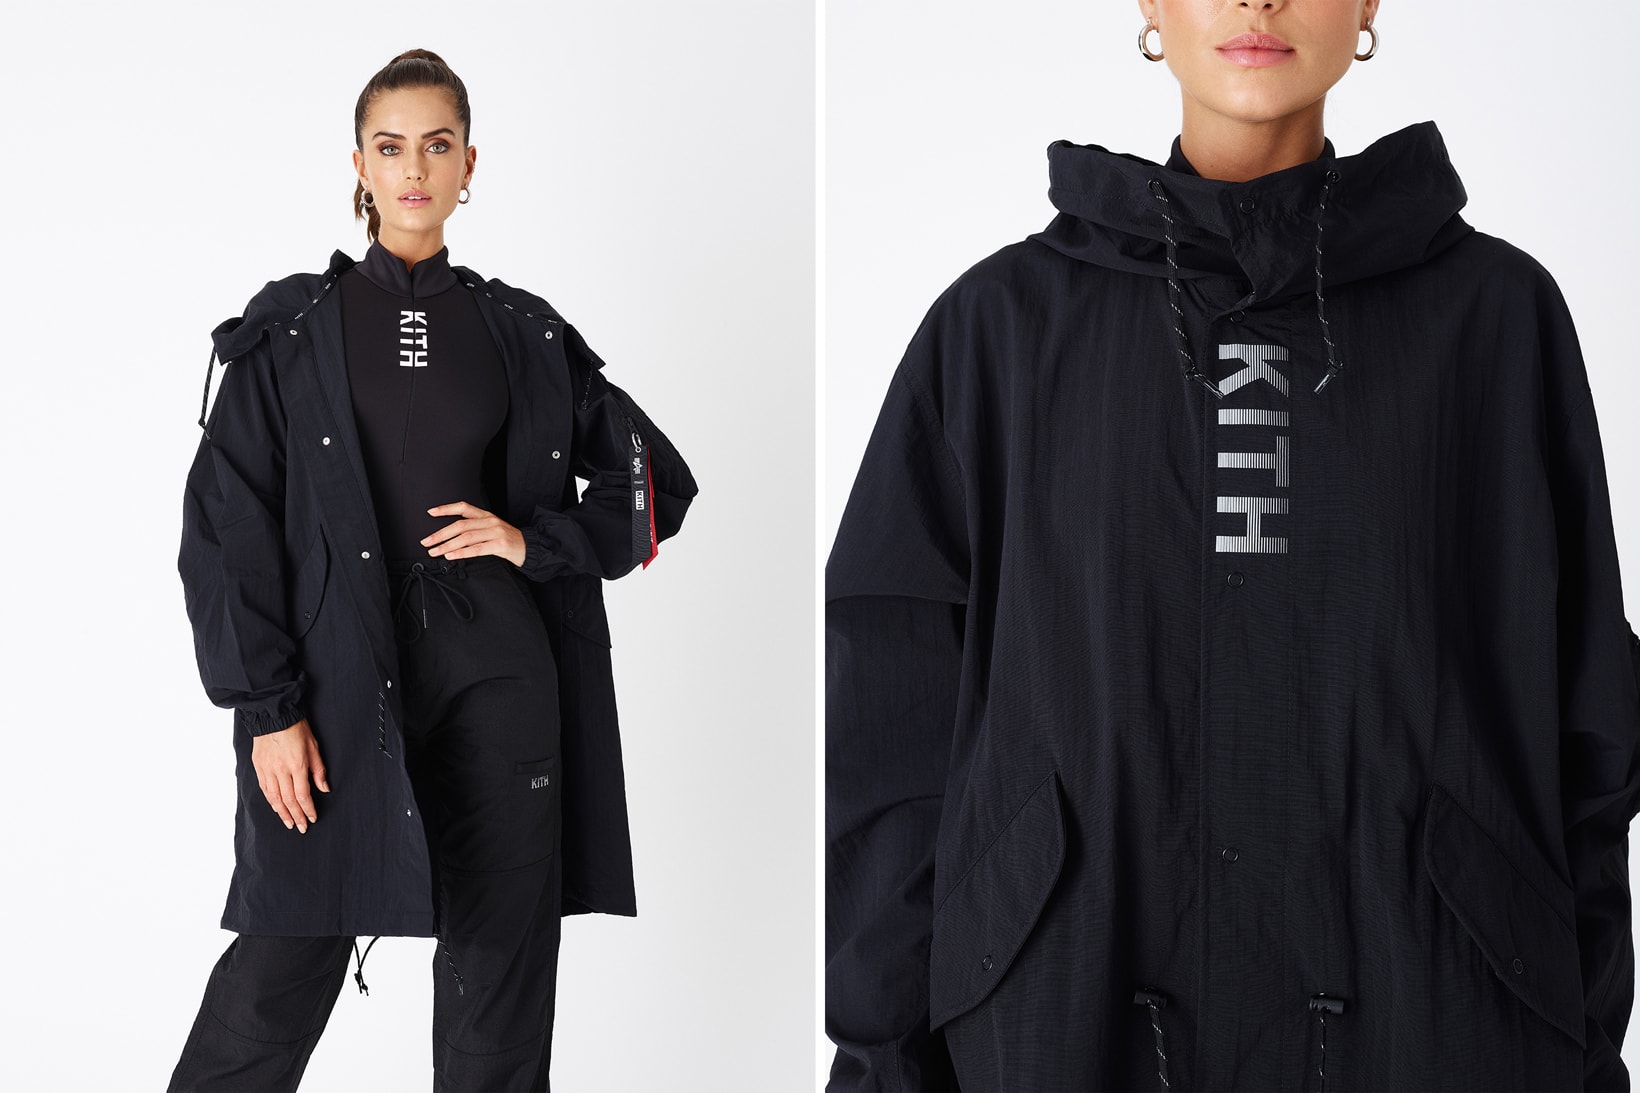 KITH Women Positive Energy Spring 2019 Collection Alpha Industries Jacket Black